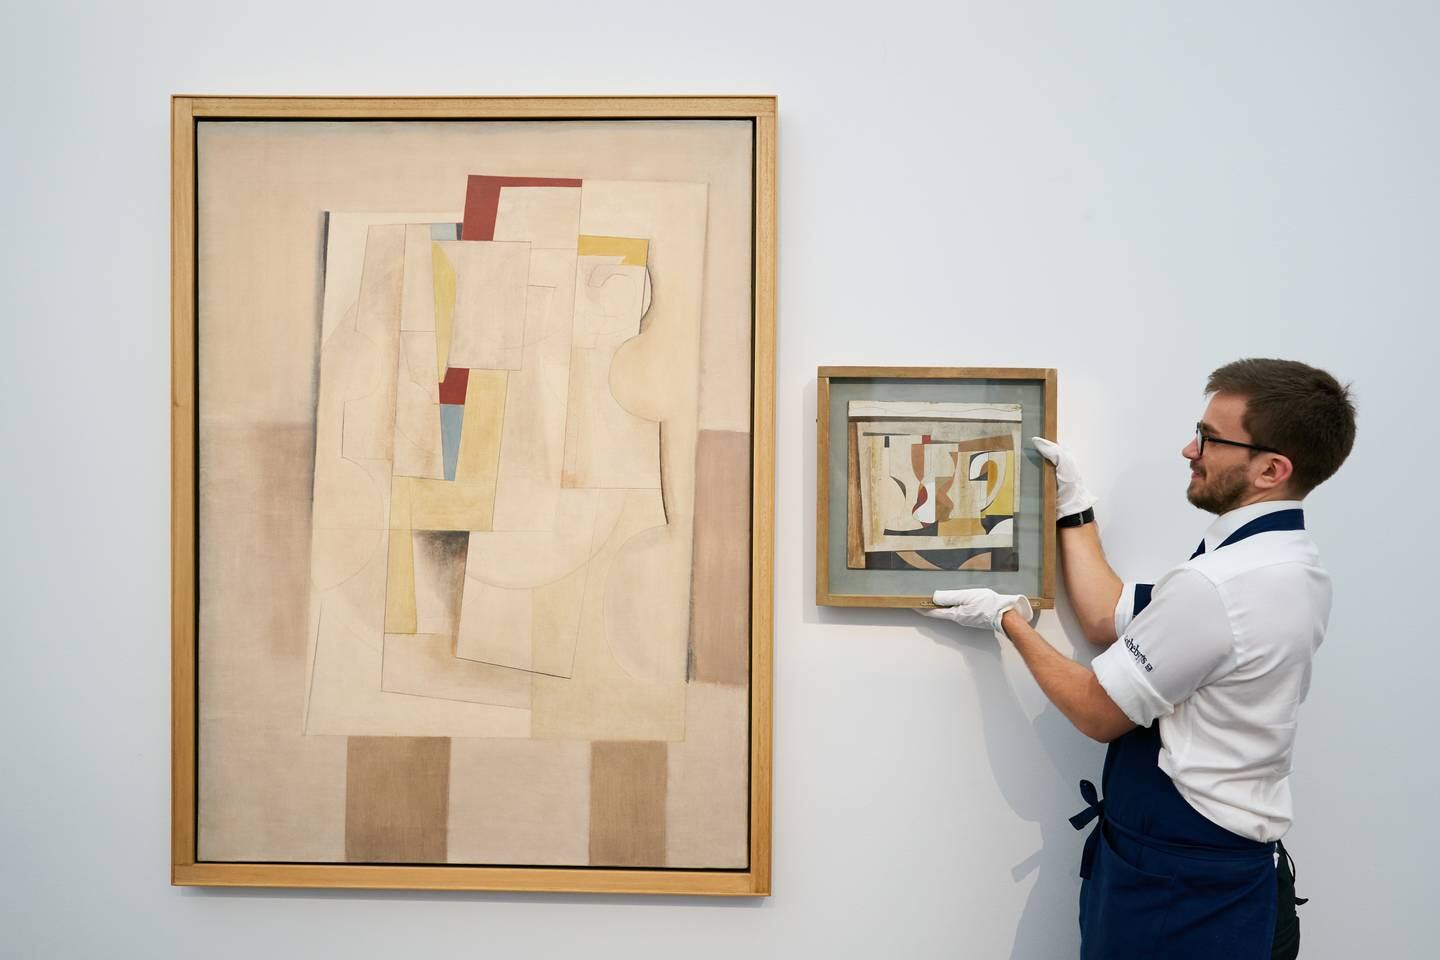 Two works by Ben Nicholson, both dating 1949, on display at Sotheby's in November 2019. Getty Images 